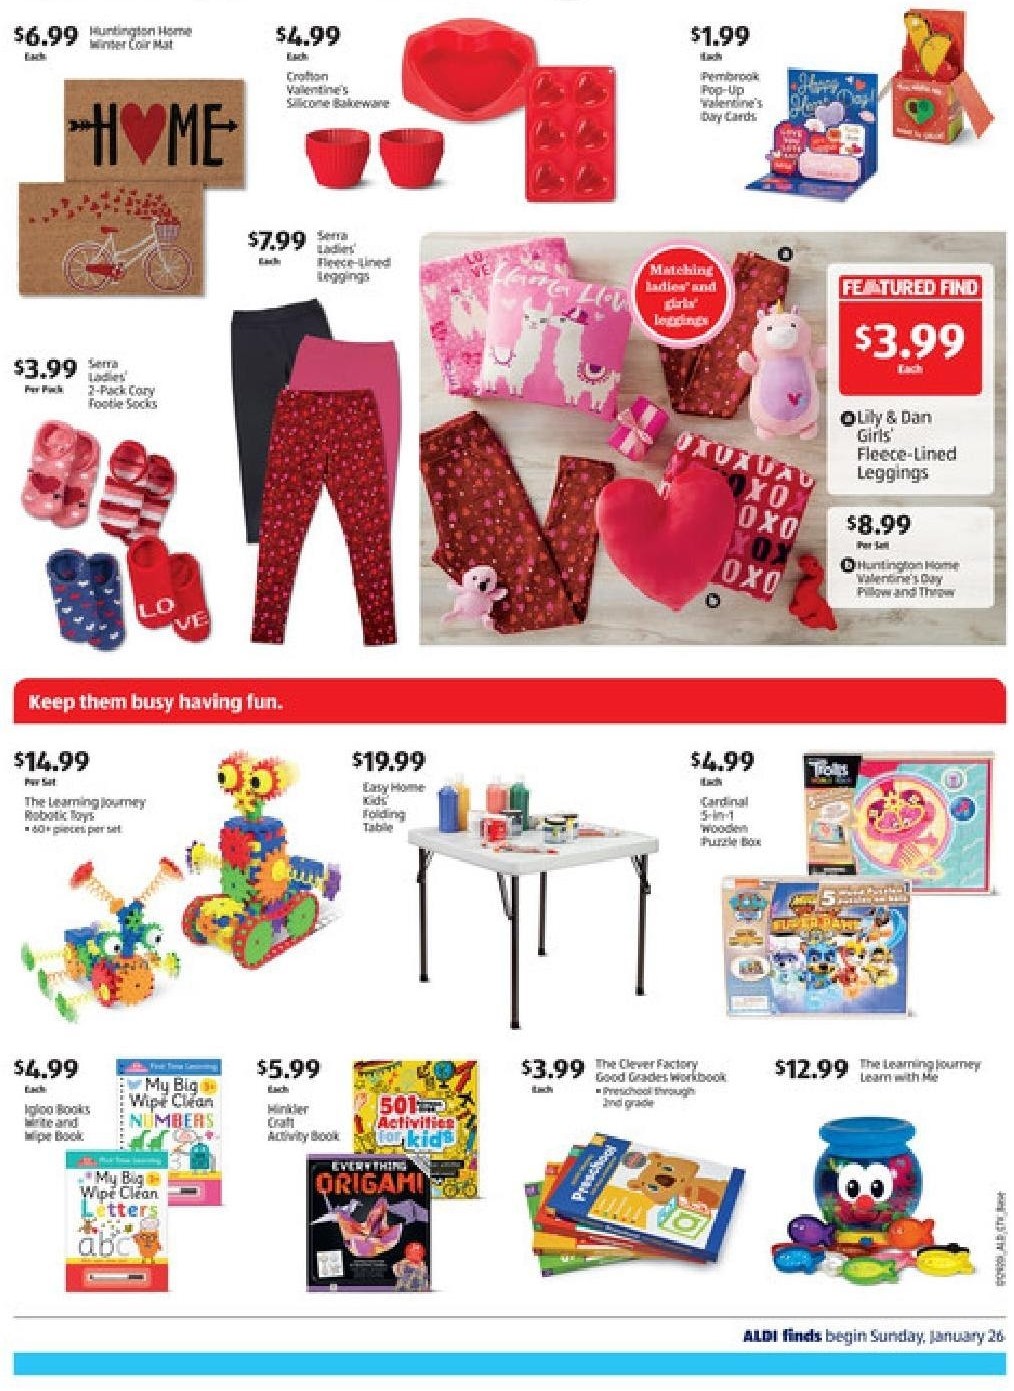 ALDI Weekly Ad from January 26